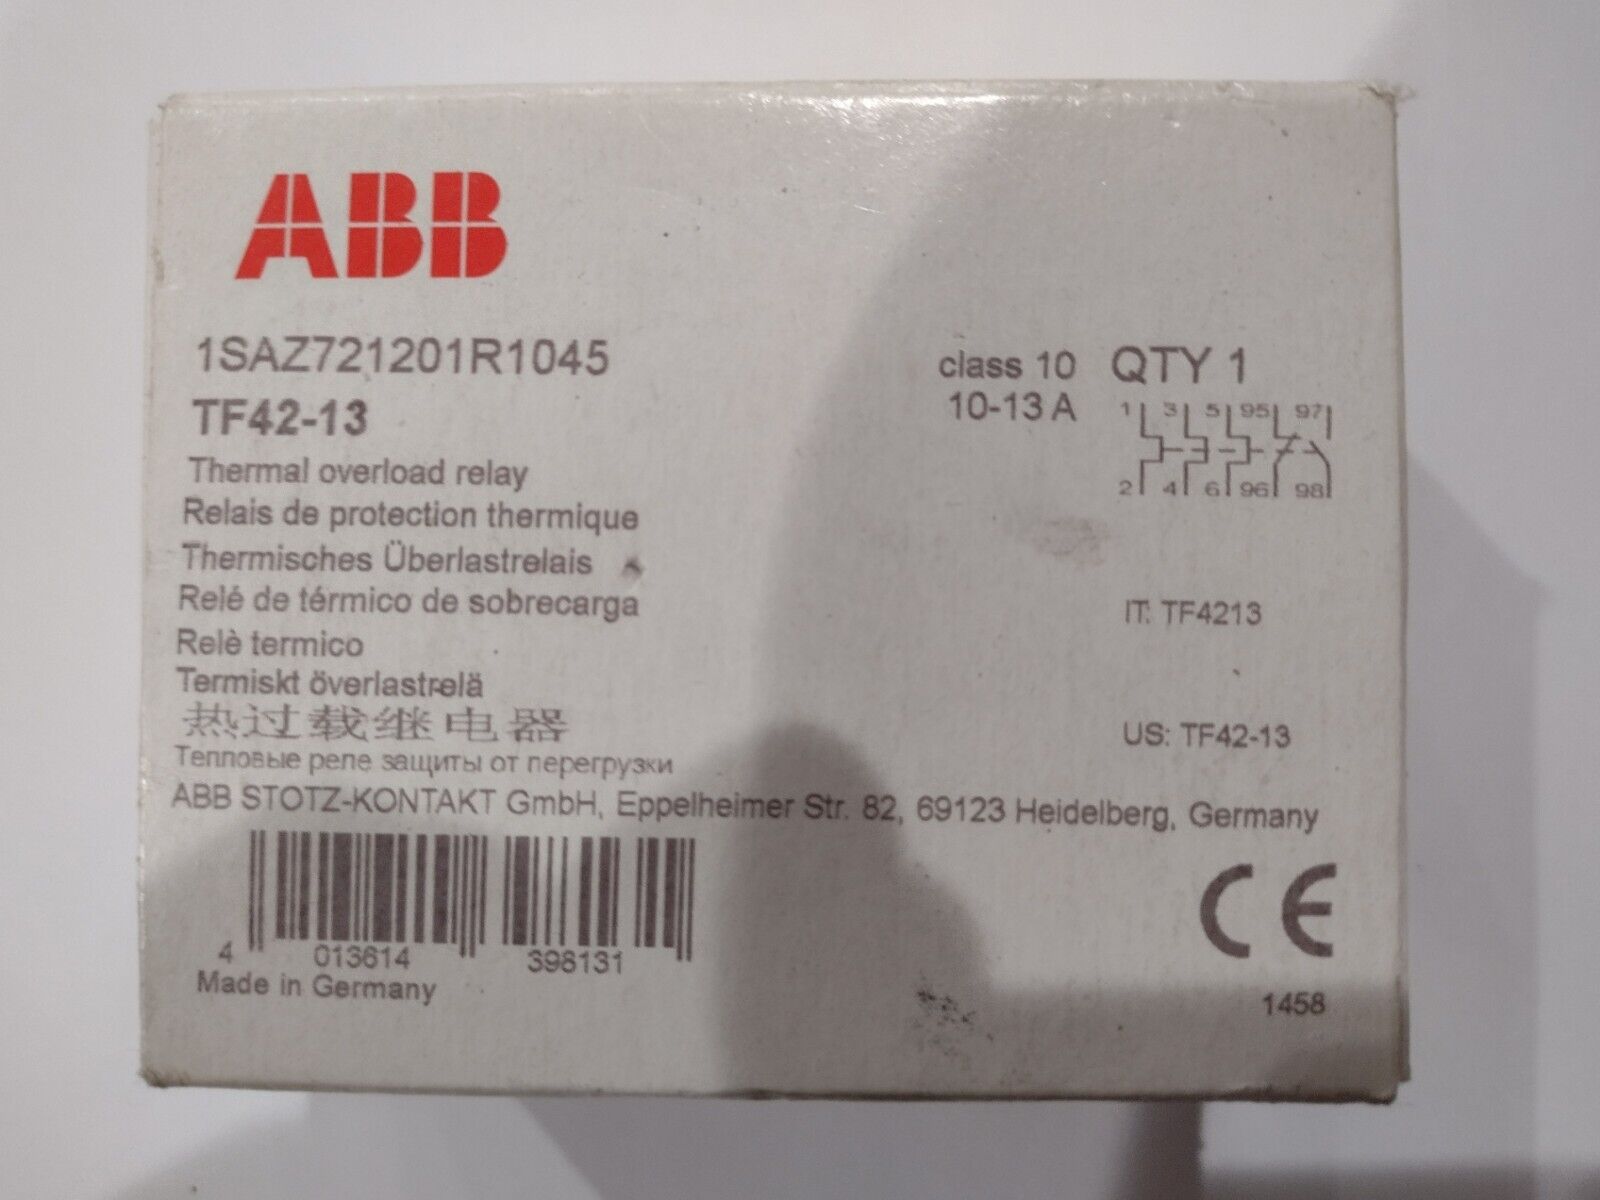 ABB TF42-13 Thermal Overload Relay, 1SAZ721201R1045